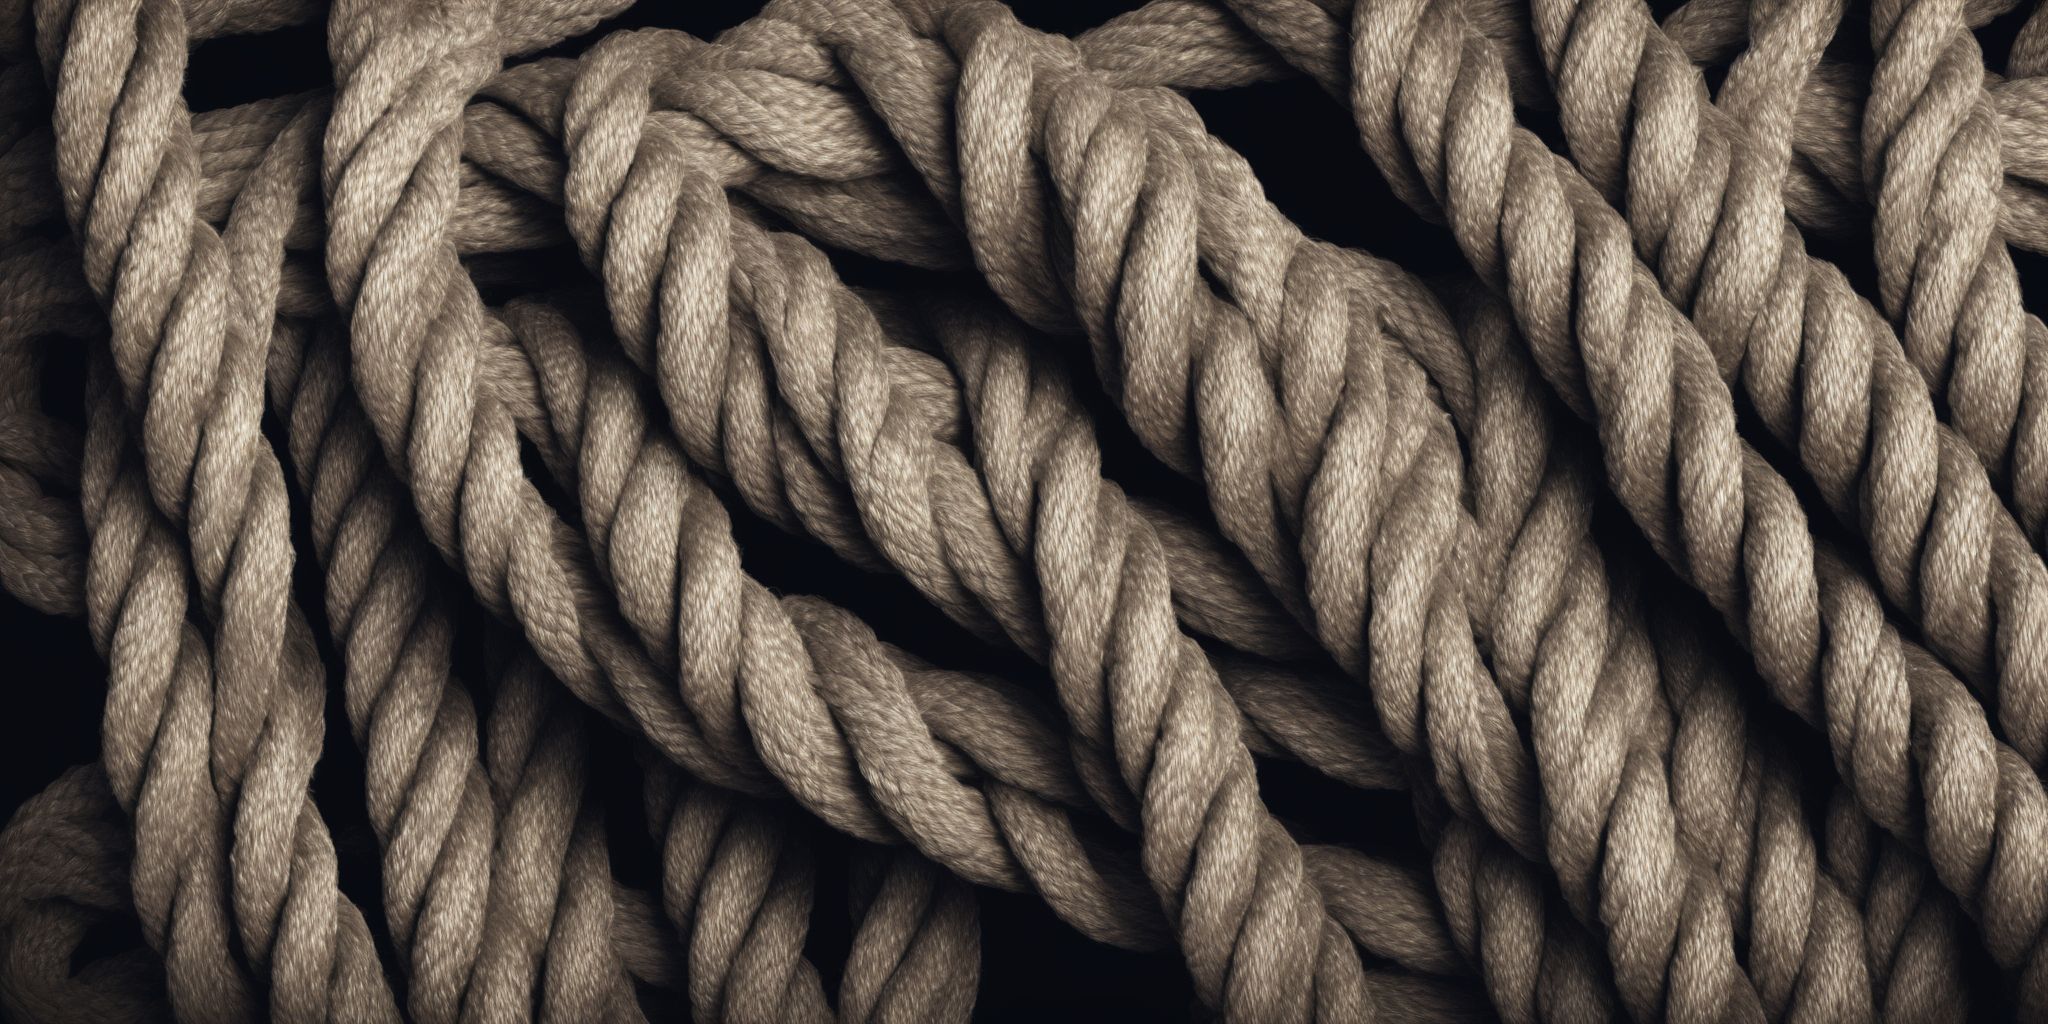 Rope  in realistic, photographic style